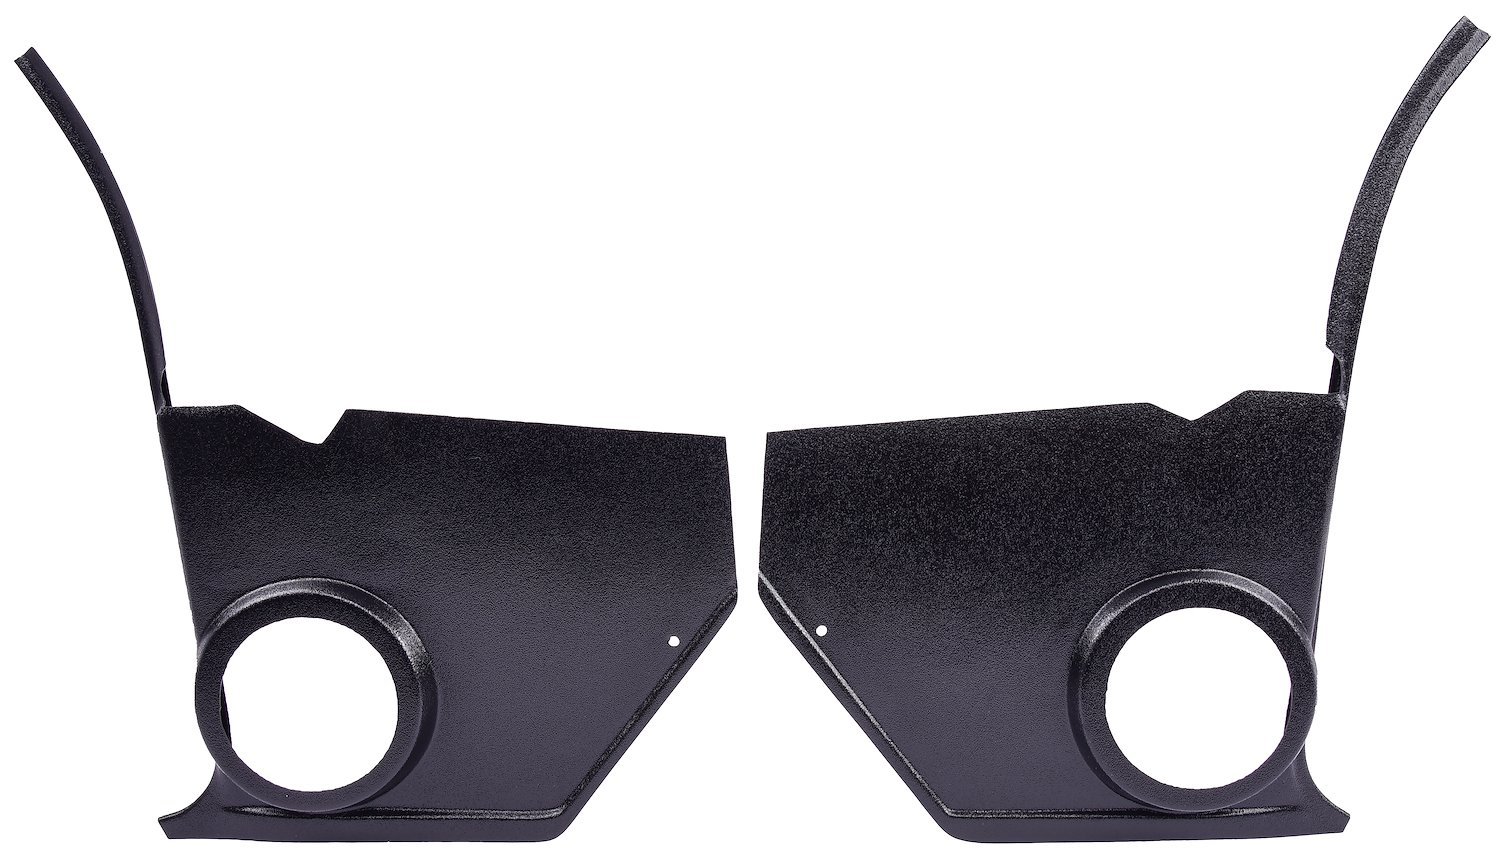 Interior Kick Panels for 1967-1968 GM F-Body [With Cutout for 6 1/2 in. Round Speakers]